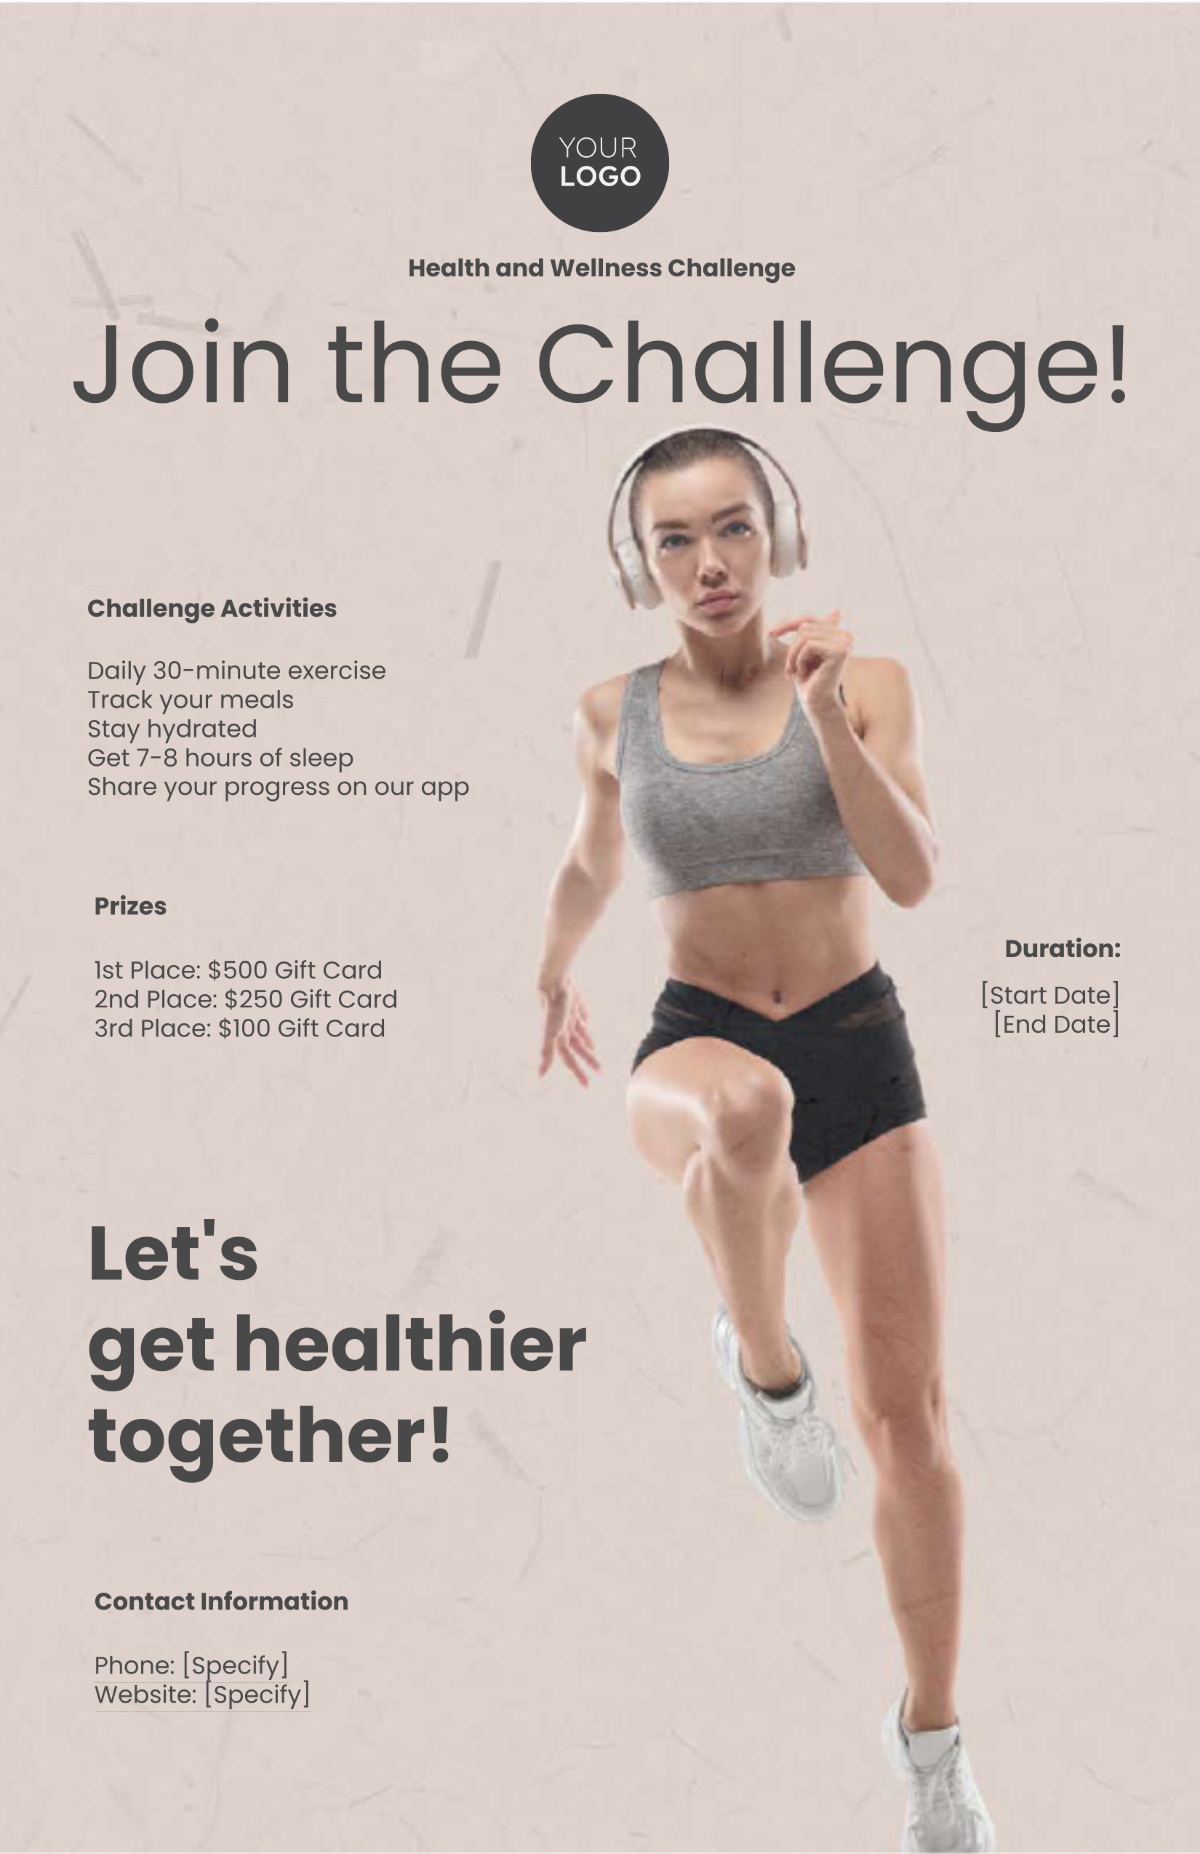 Health and Wellness Challenge Poster HR Template